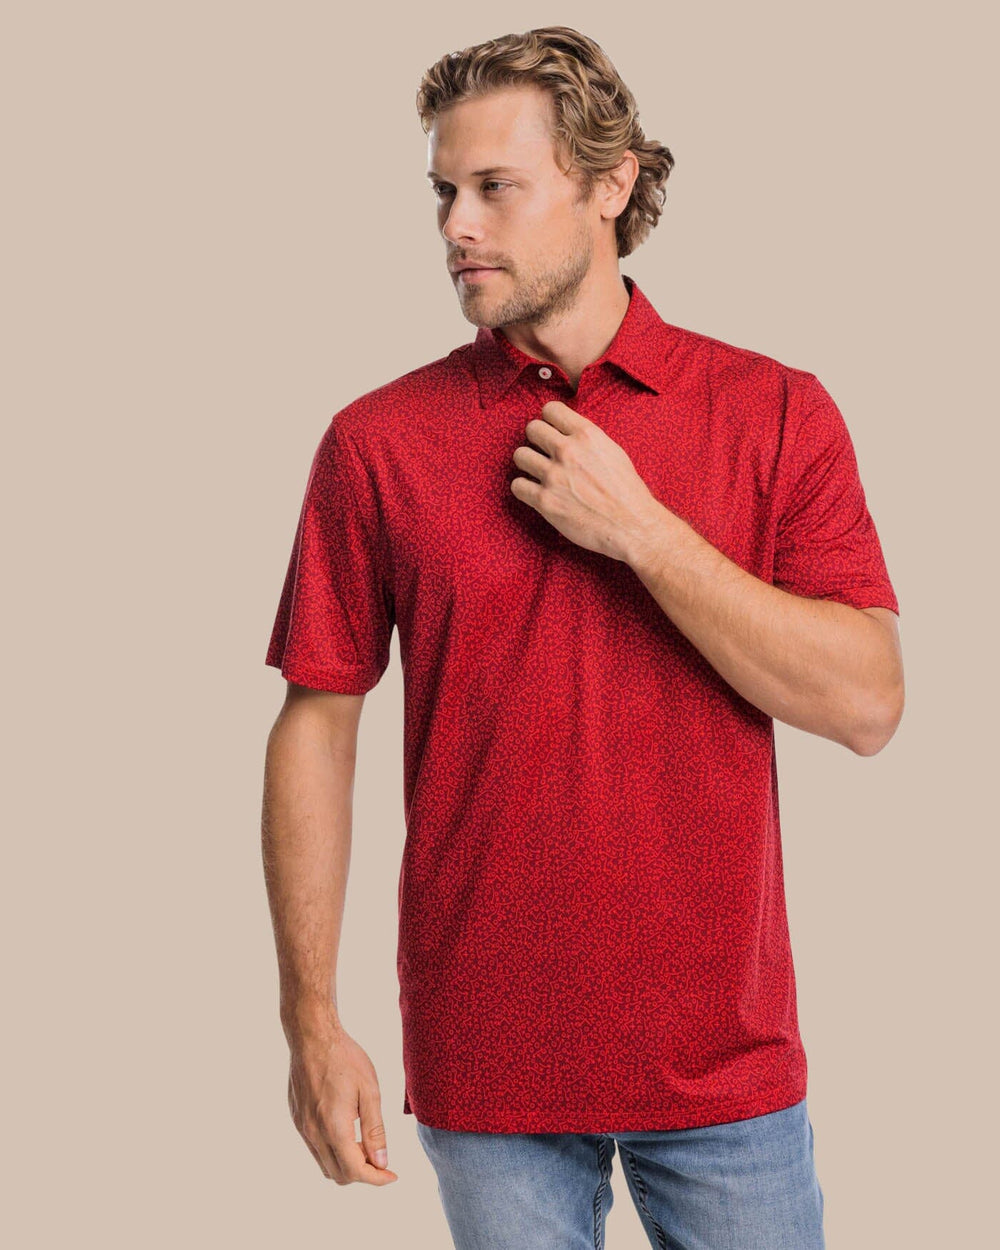 The front view of the Southern Tide Driver Gameplay Polo by Southern Tide - Chianti